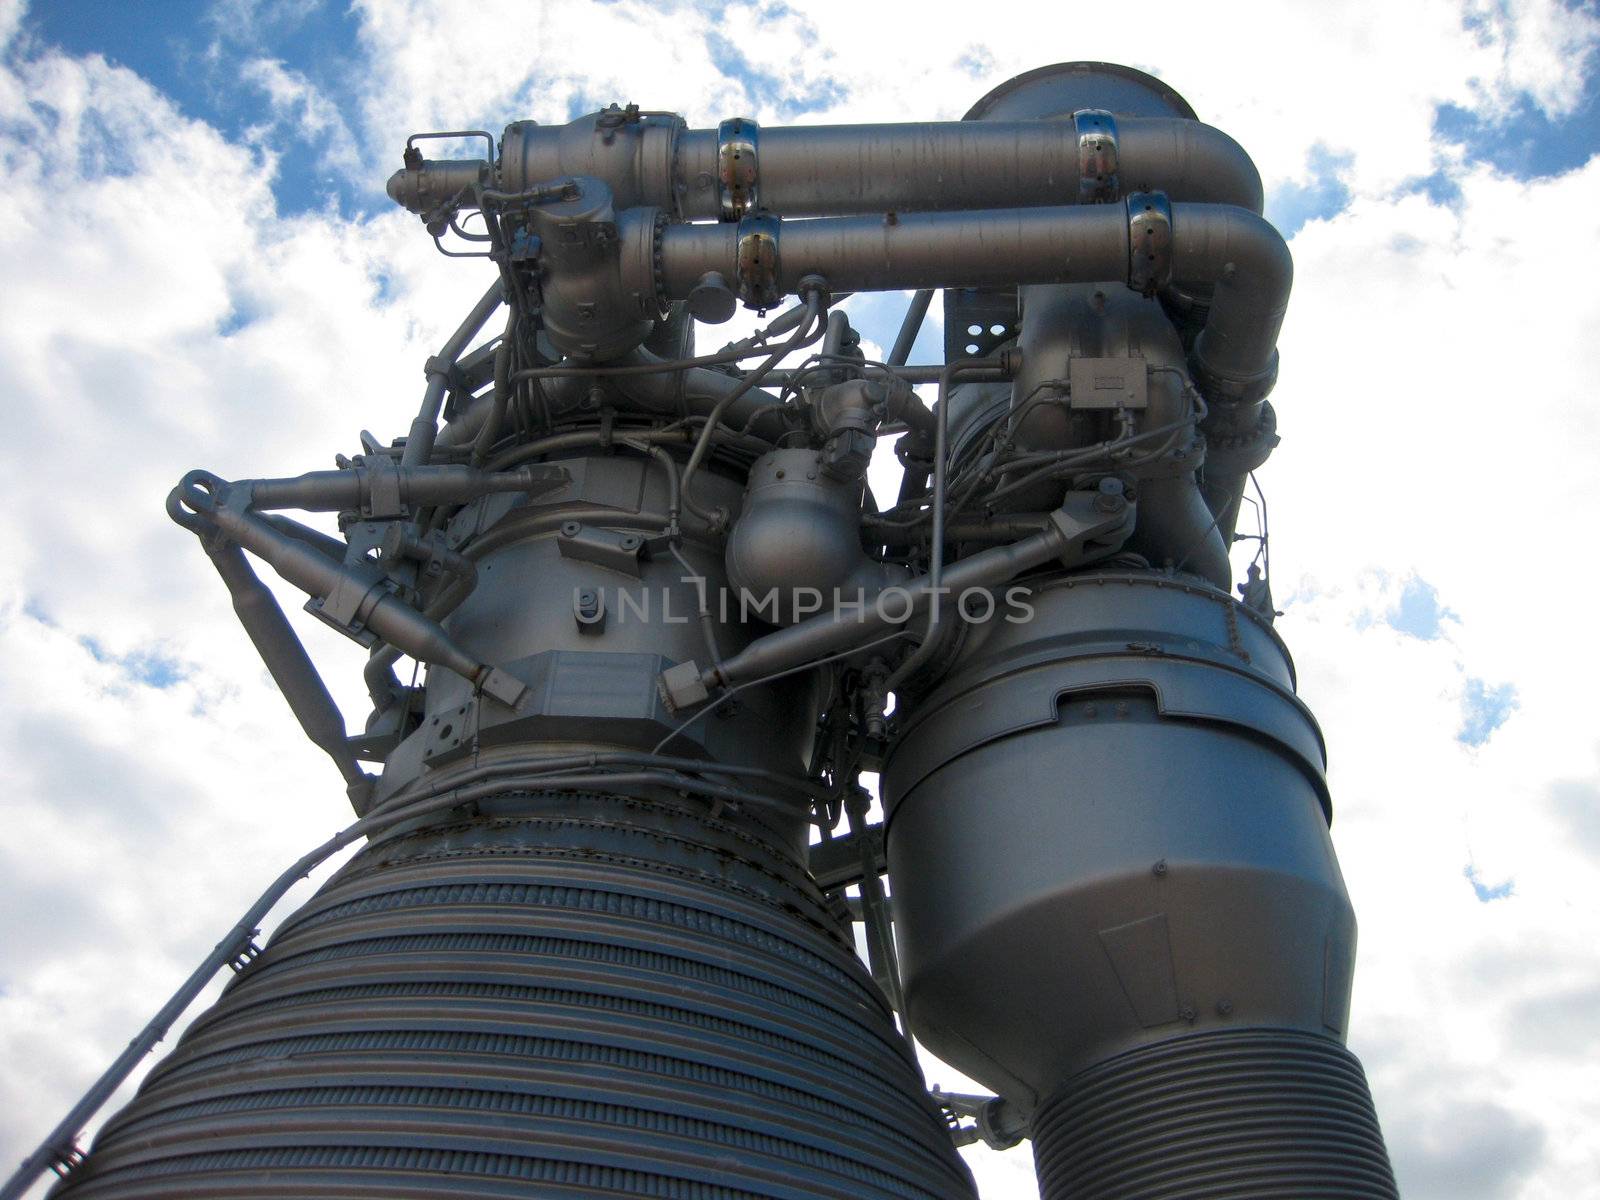 stock pictures of an industrial engine showing the pipes and valves